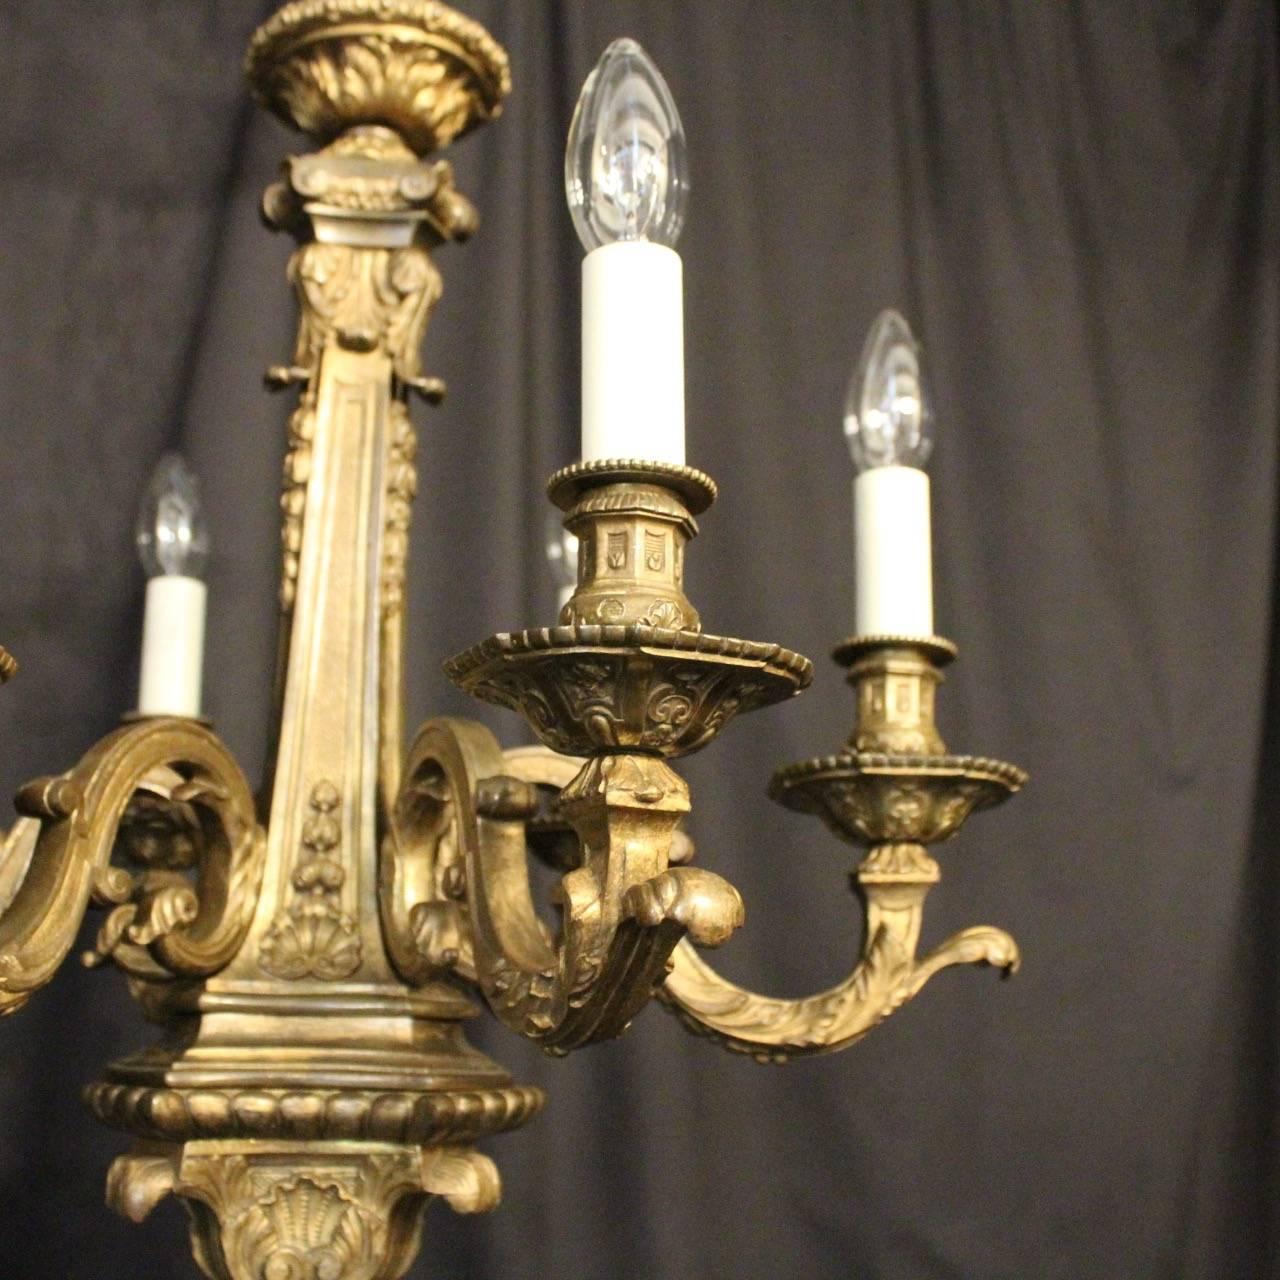 A quality English gilded cast bronze six-light antique chandelier, the ornate leaf scrolling arms with sectional leaf bobeche drip pans and ornate candle sconces, issuing from a tapering central column with lovely leaf base and having the original